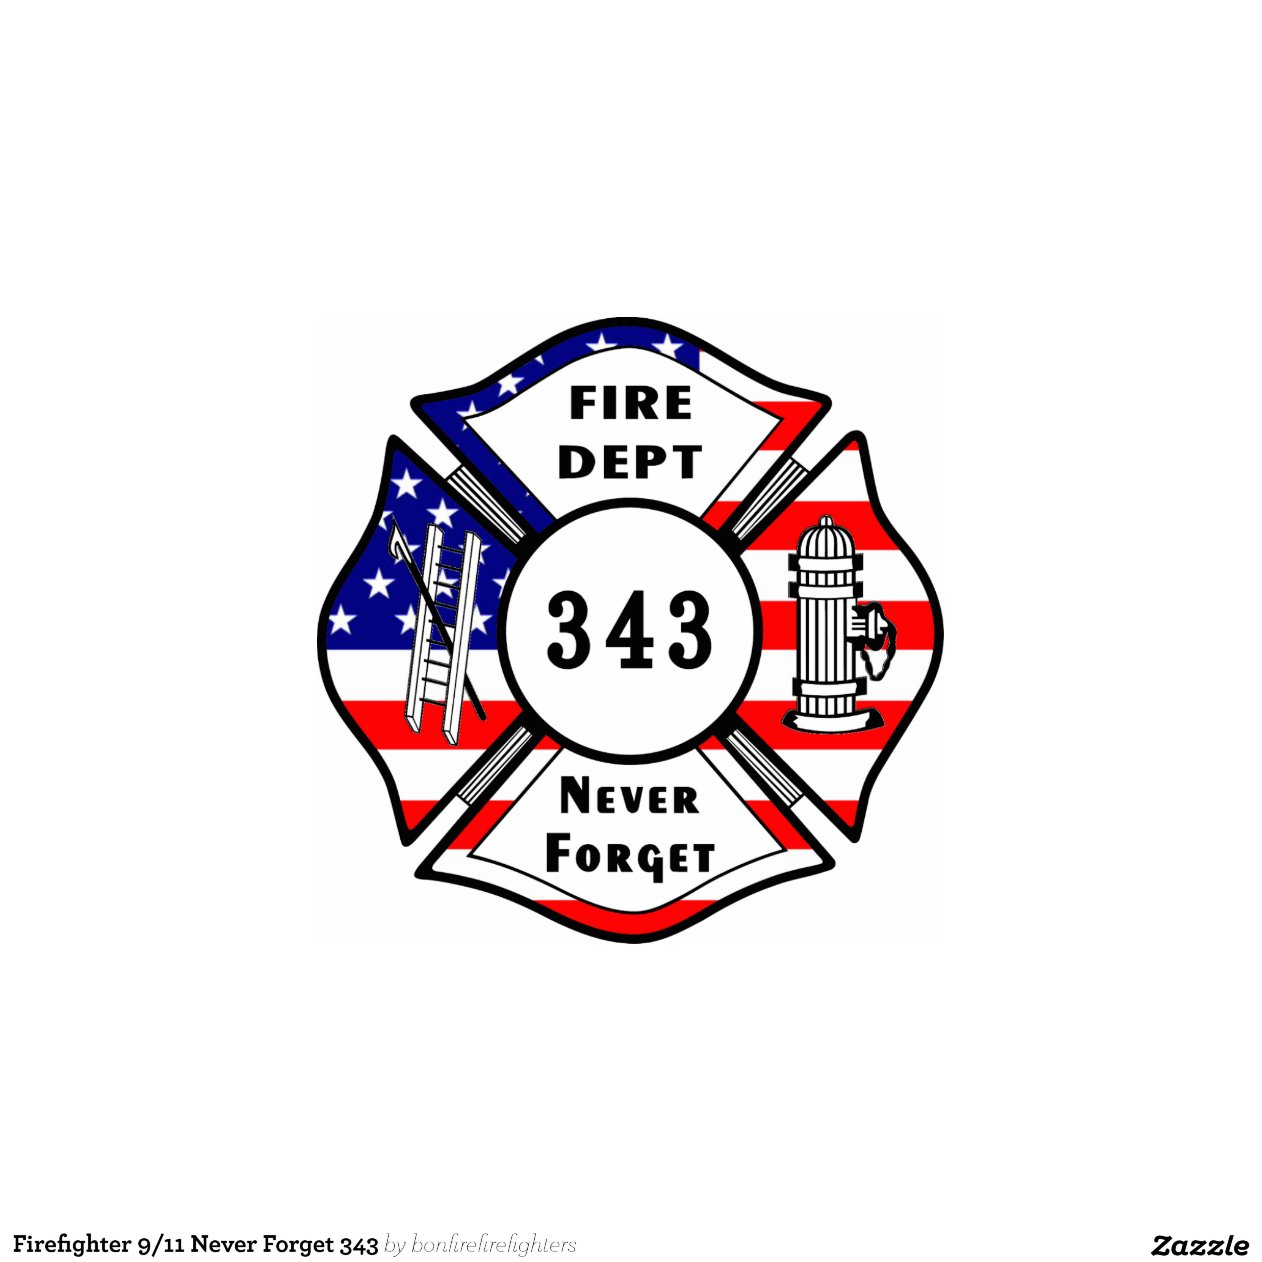 Firefighter 9/11 Never Forget 343 | Zazzle